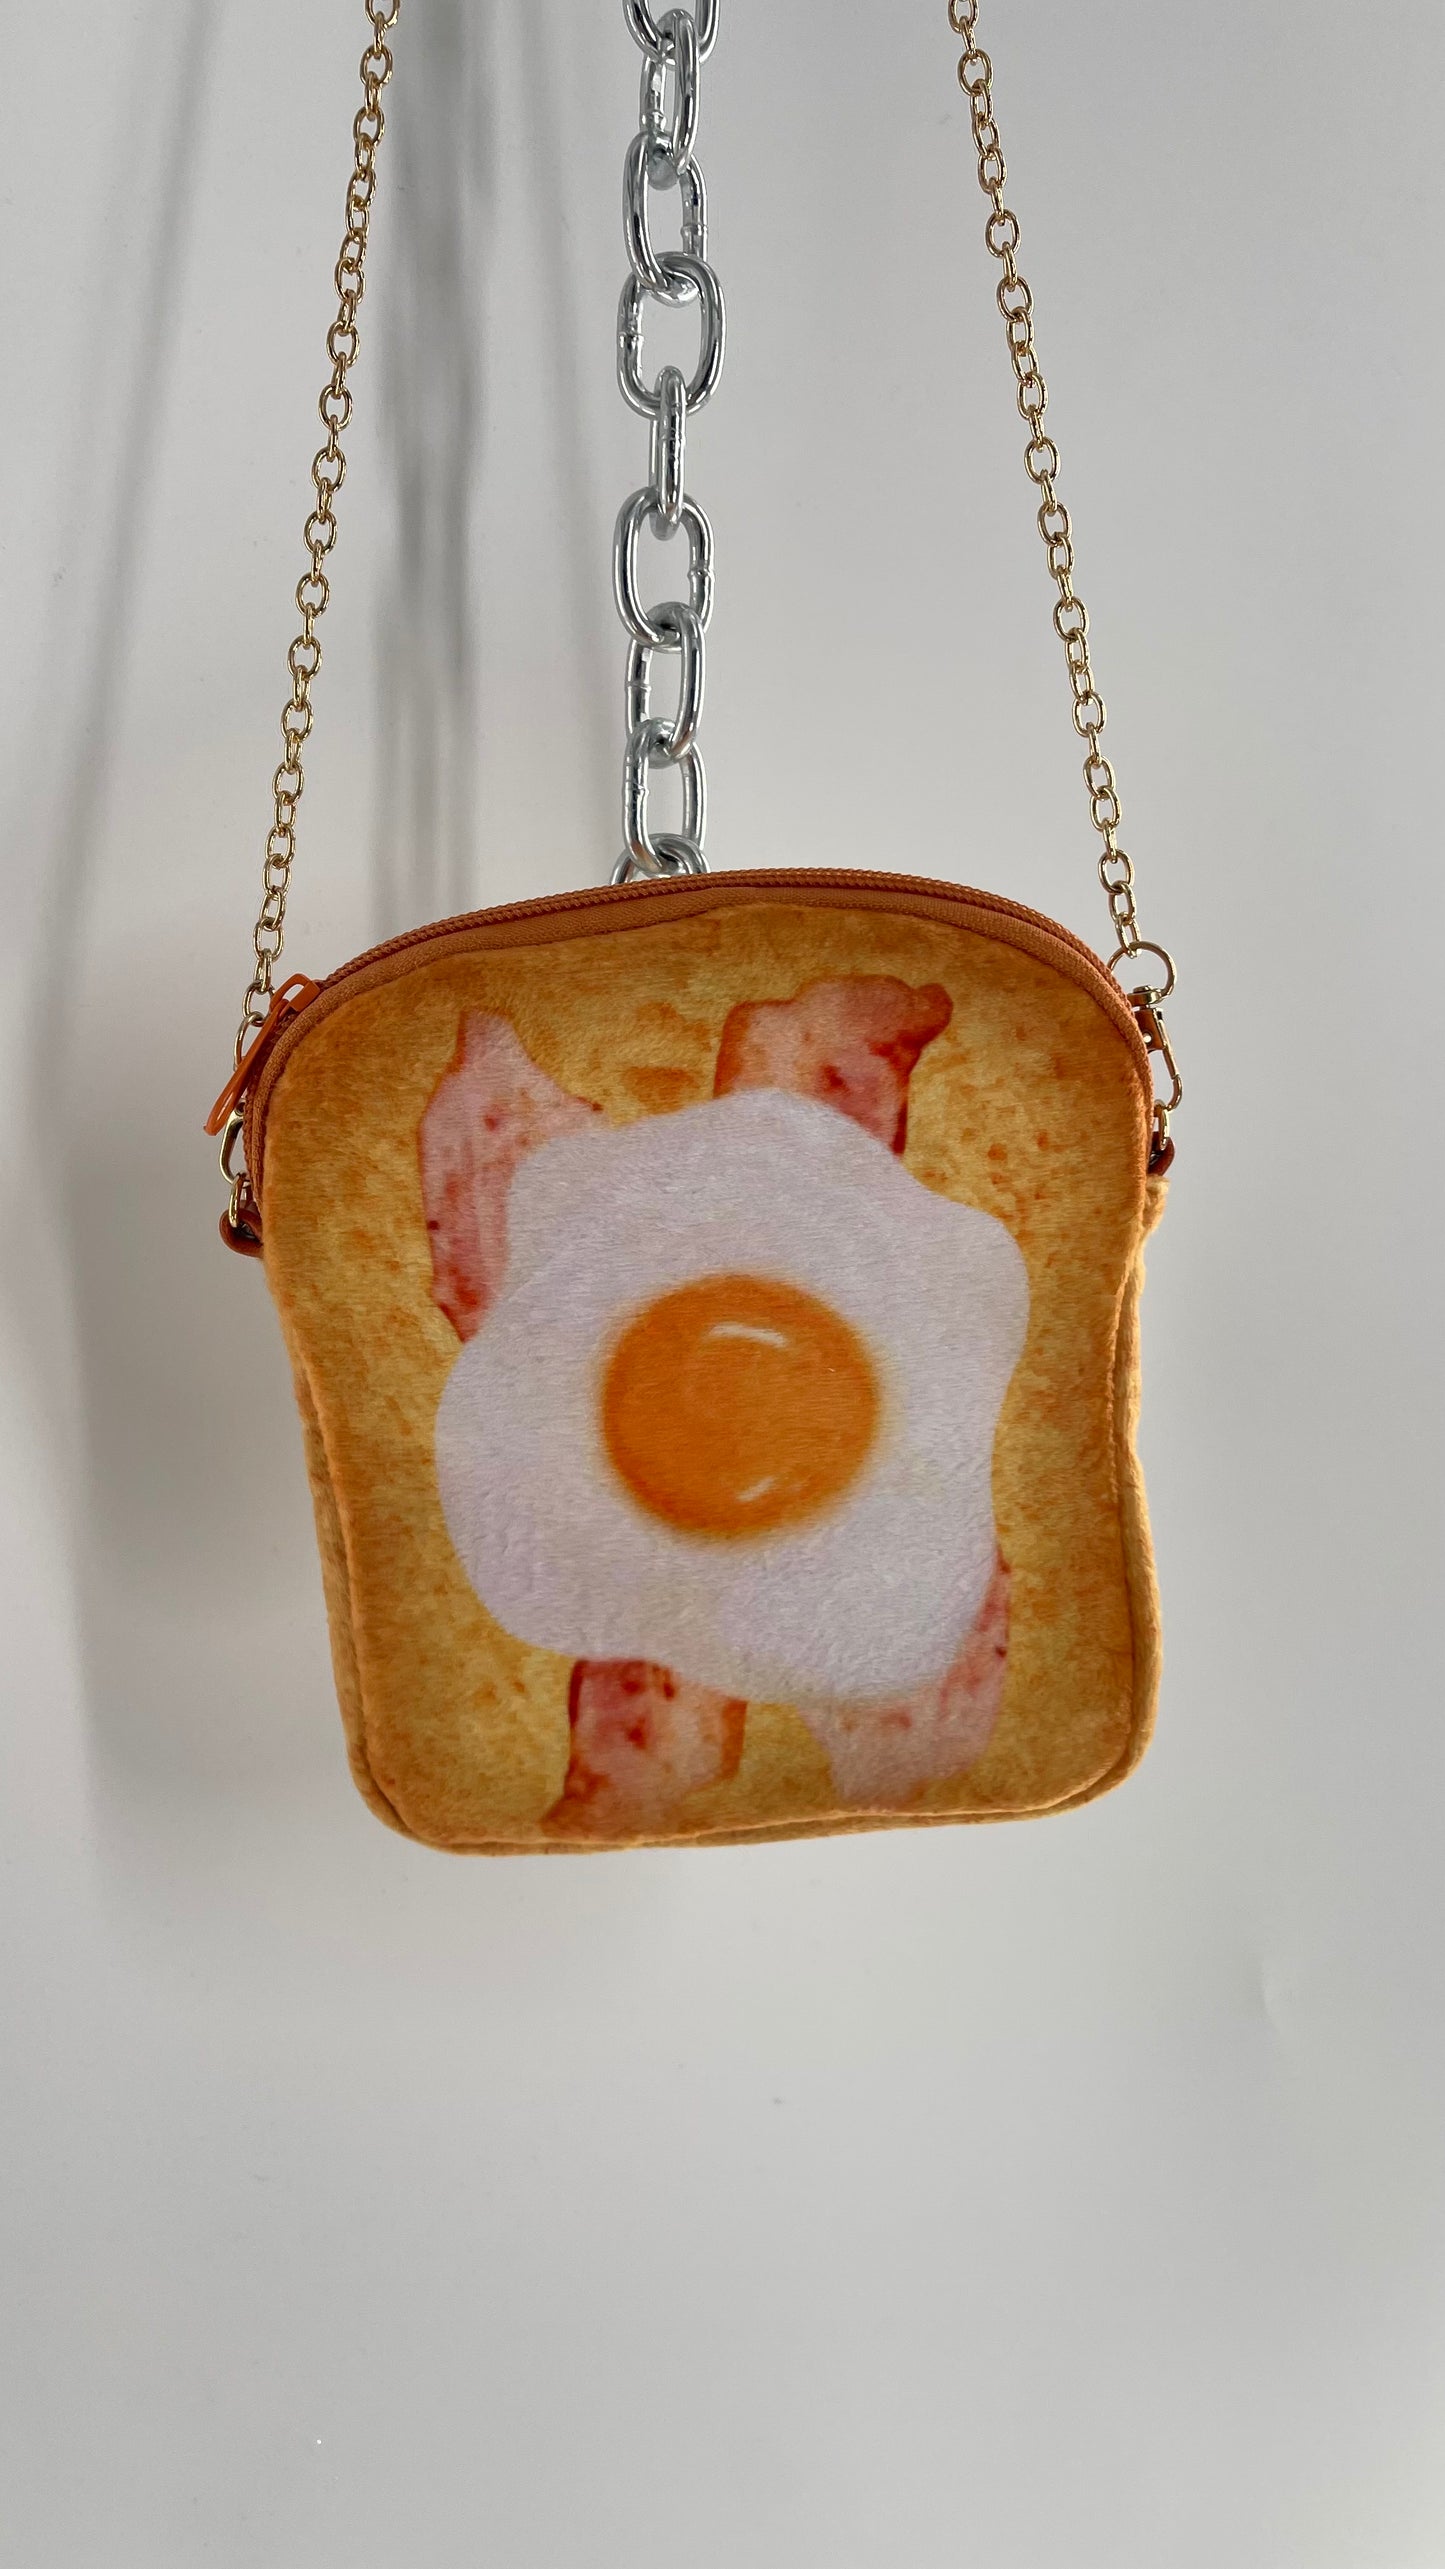 Toast Purse with Egg and Bacon Strips- Breakfast on The Go Bag